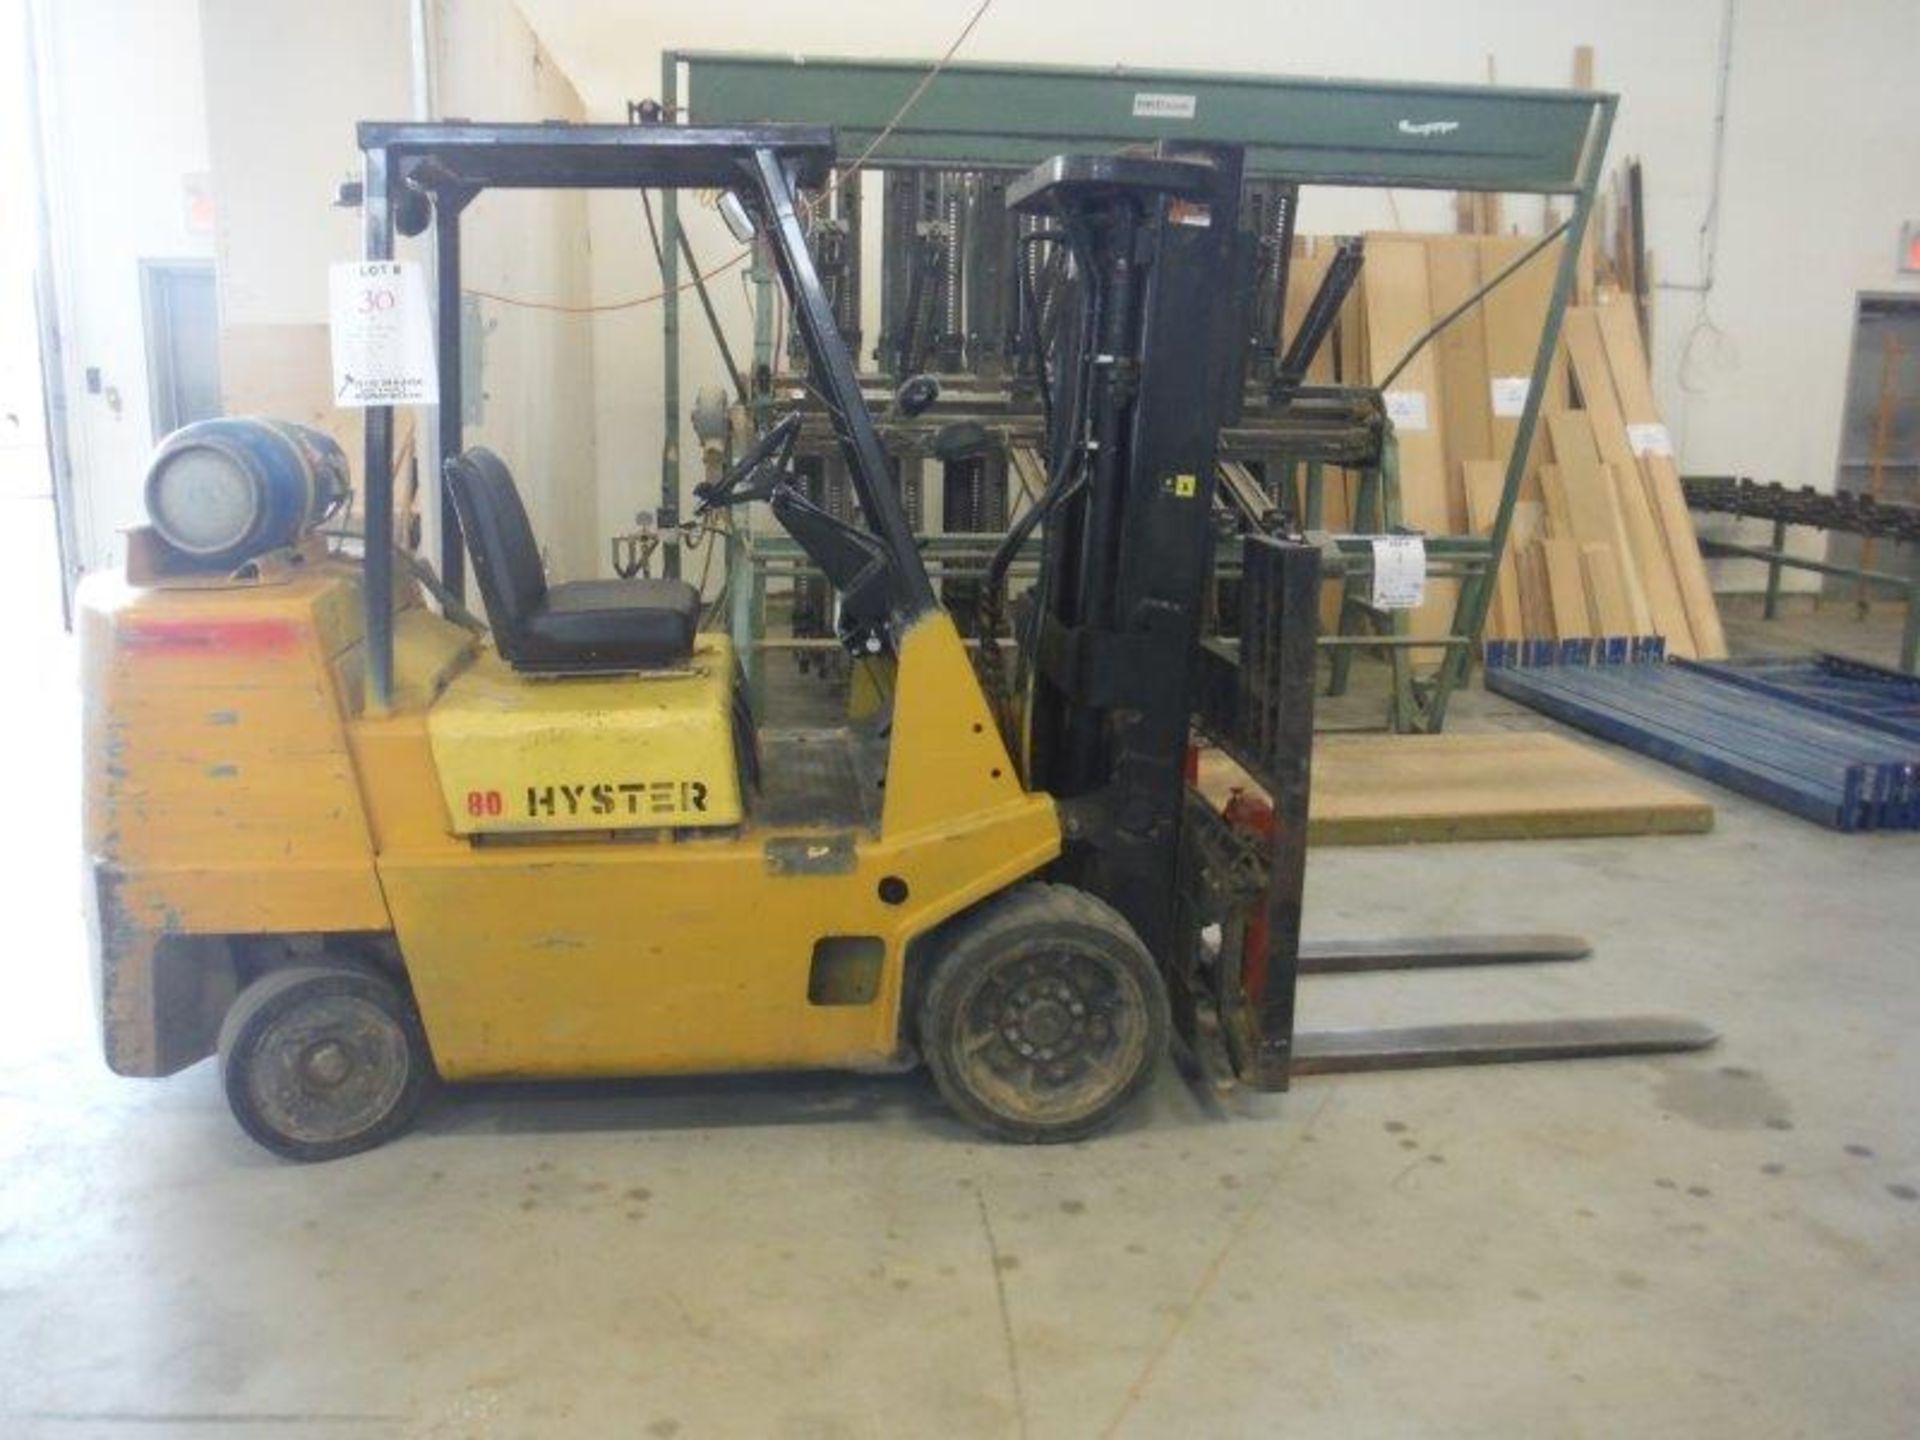 HYSTER PROPANE LIFT TRUCK, 8,000 LBS CAP. SIDE-SHIFT, HARD TIRES, 172'' HEIGHT, C/W EXTENSION FORKS